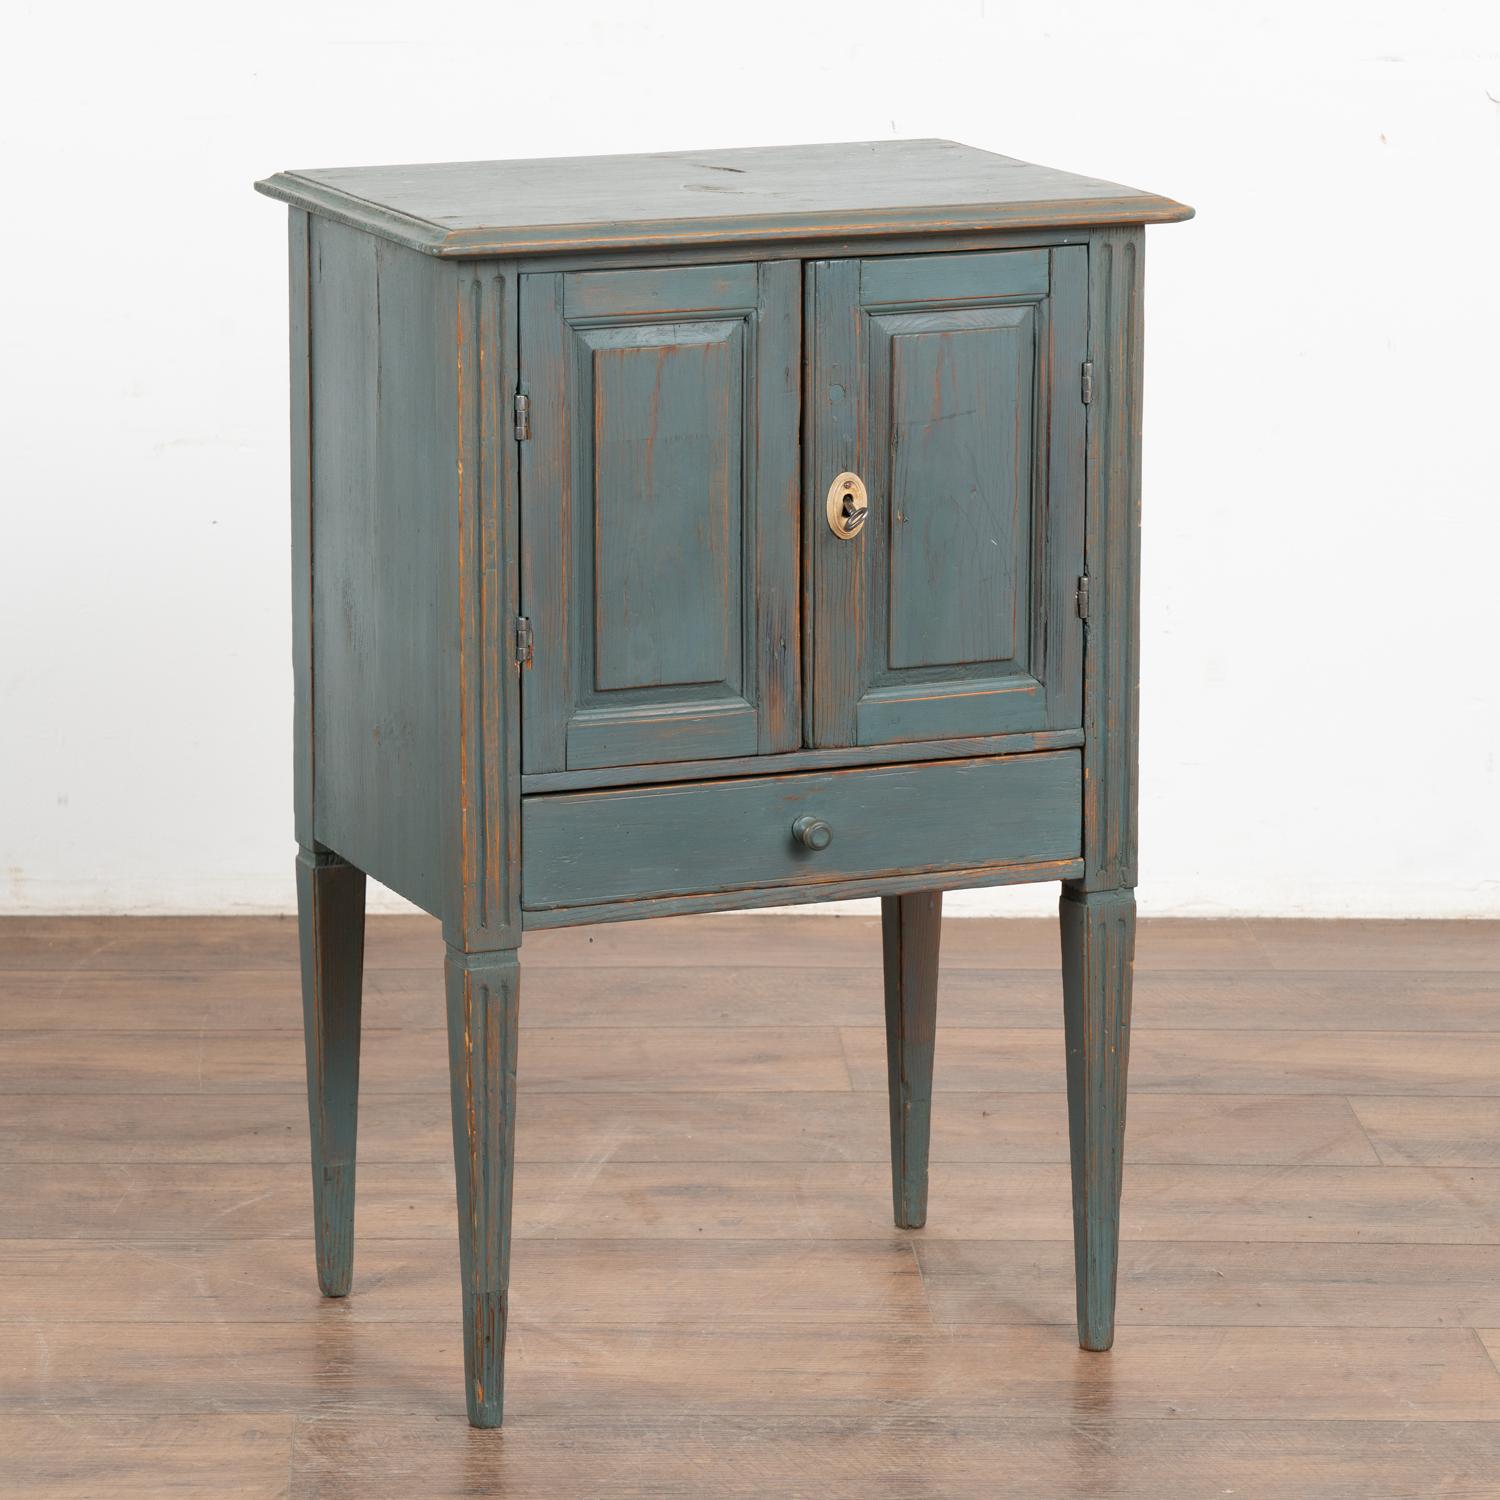 Small Swedish country pine cabinet standing on fluted tapered legs; may serve also as a nightstand or side table.
Two cabinet doors rest over a single drawer.
The old lock still functions on the right cabinet door and key is used to open.
The newer